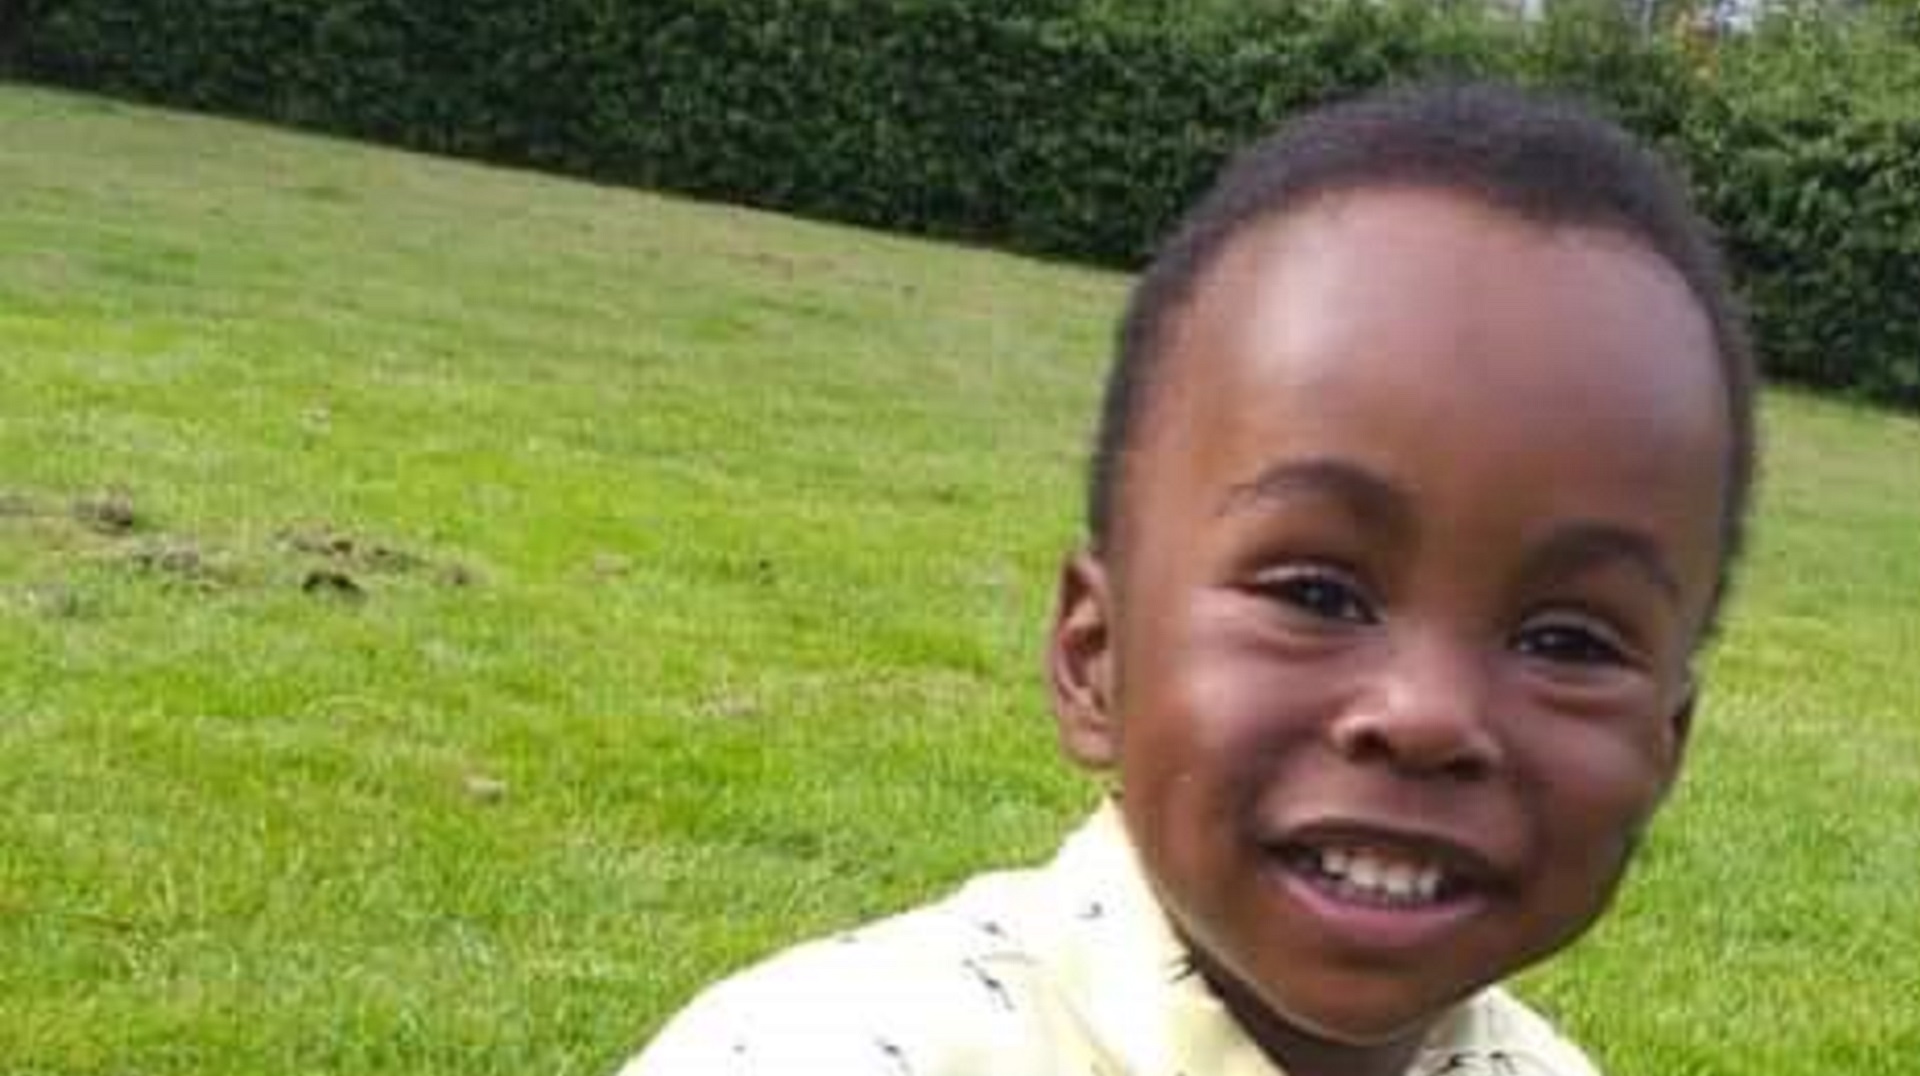 Rochdale toddler Awaab Ishak died due to damp and mould in his social housing flat